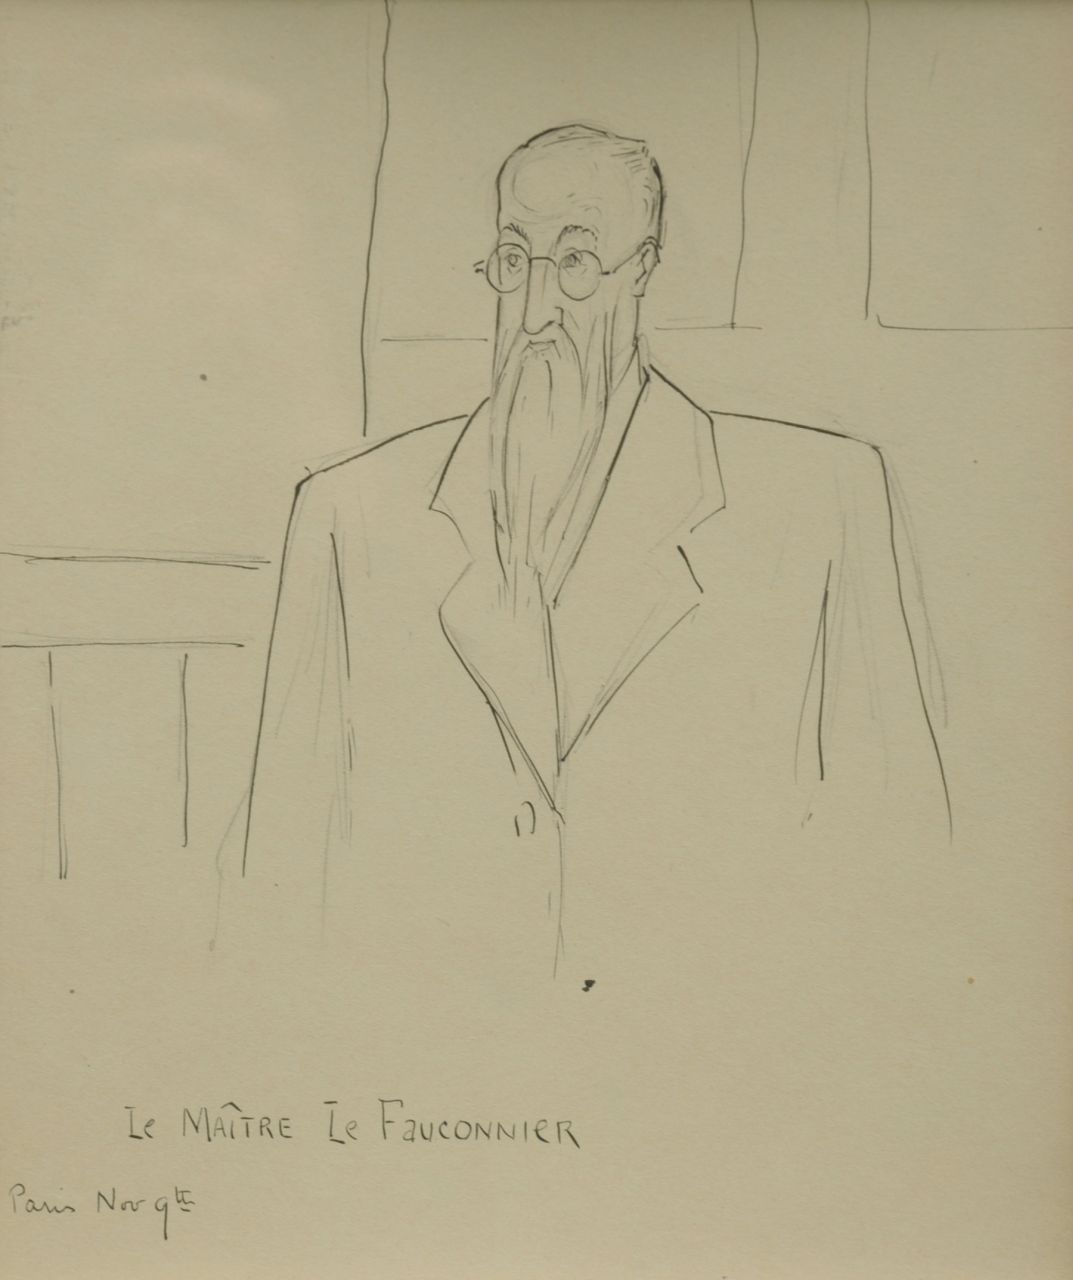 Leese G.  | Gertrude Leese | Watercolours and drawings offered for sale | A portrait of Henri Le Fauconnier, pencil on paper 26.5 x 23.6 cm